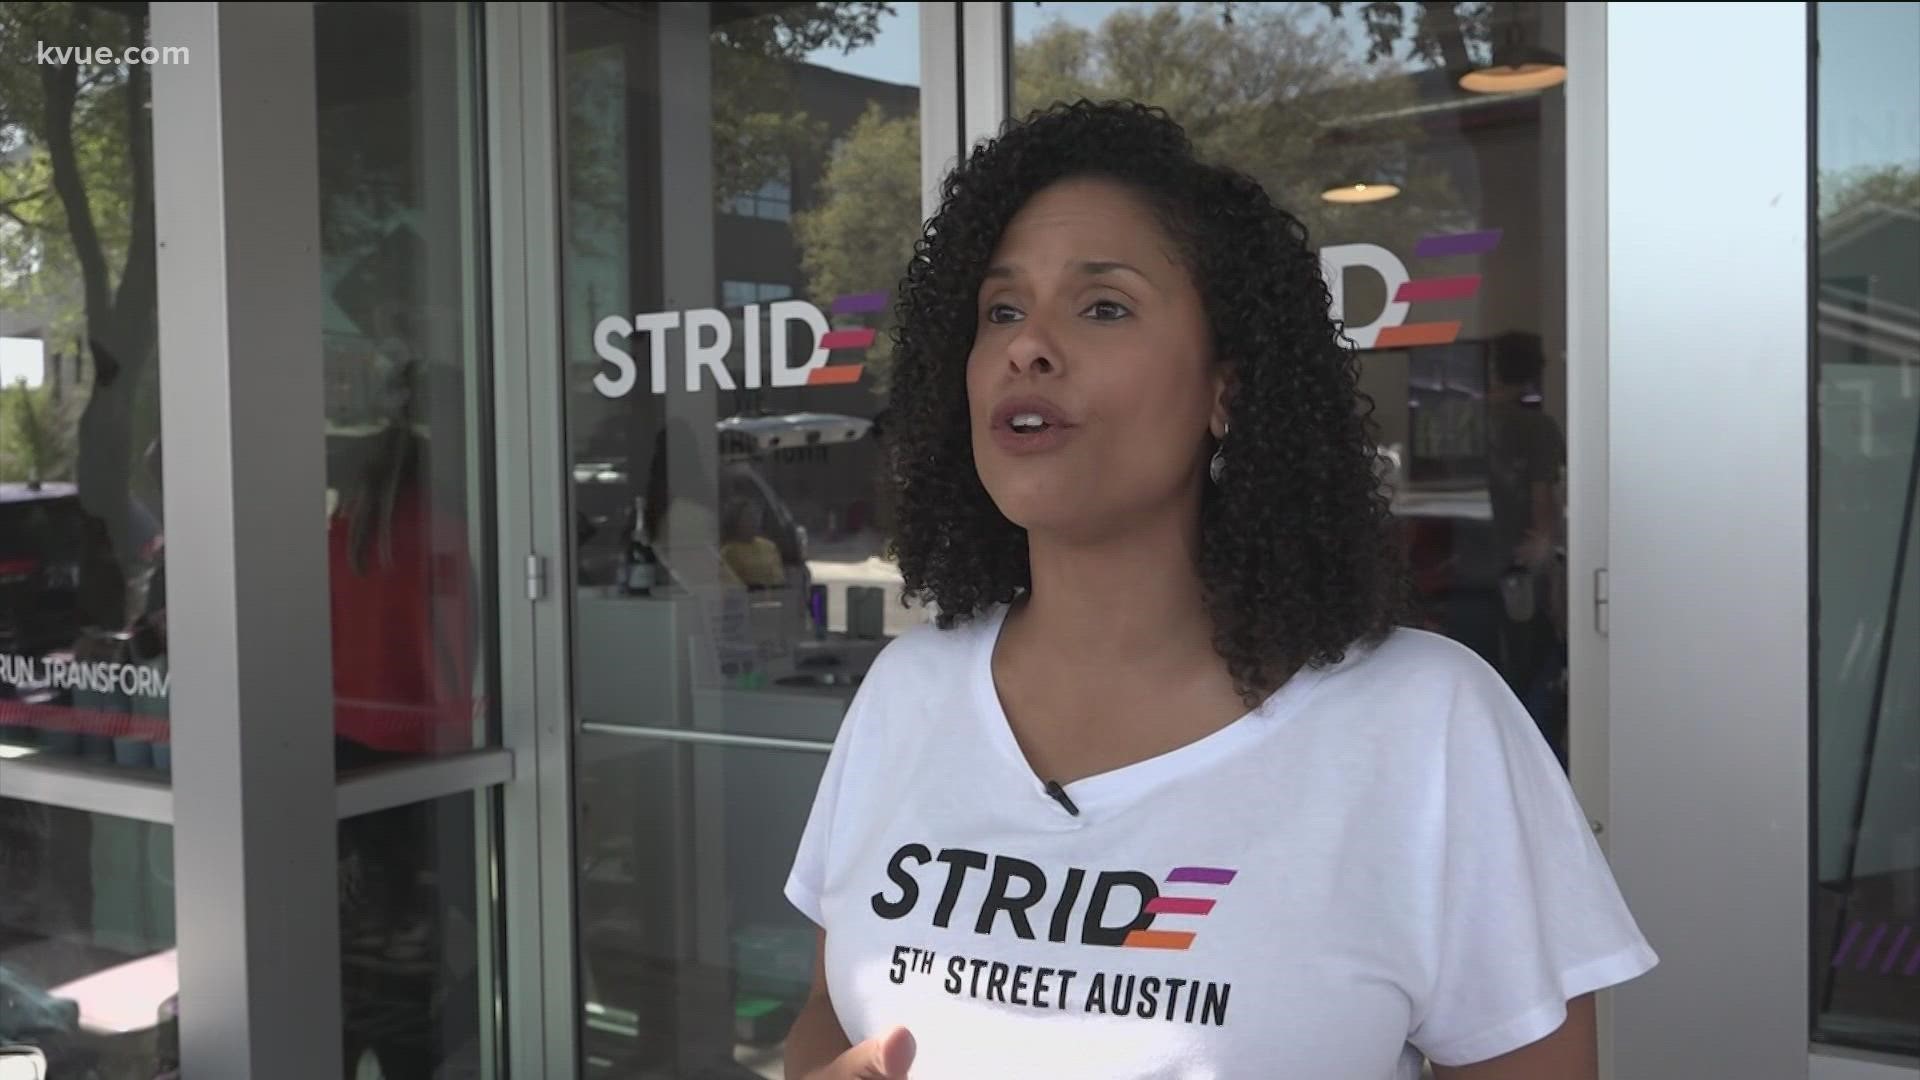 A new fitness studio, STRIDE 5th Street, hosted a grand opening event for the community Saturday morning.